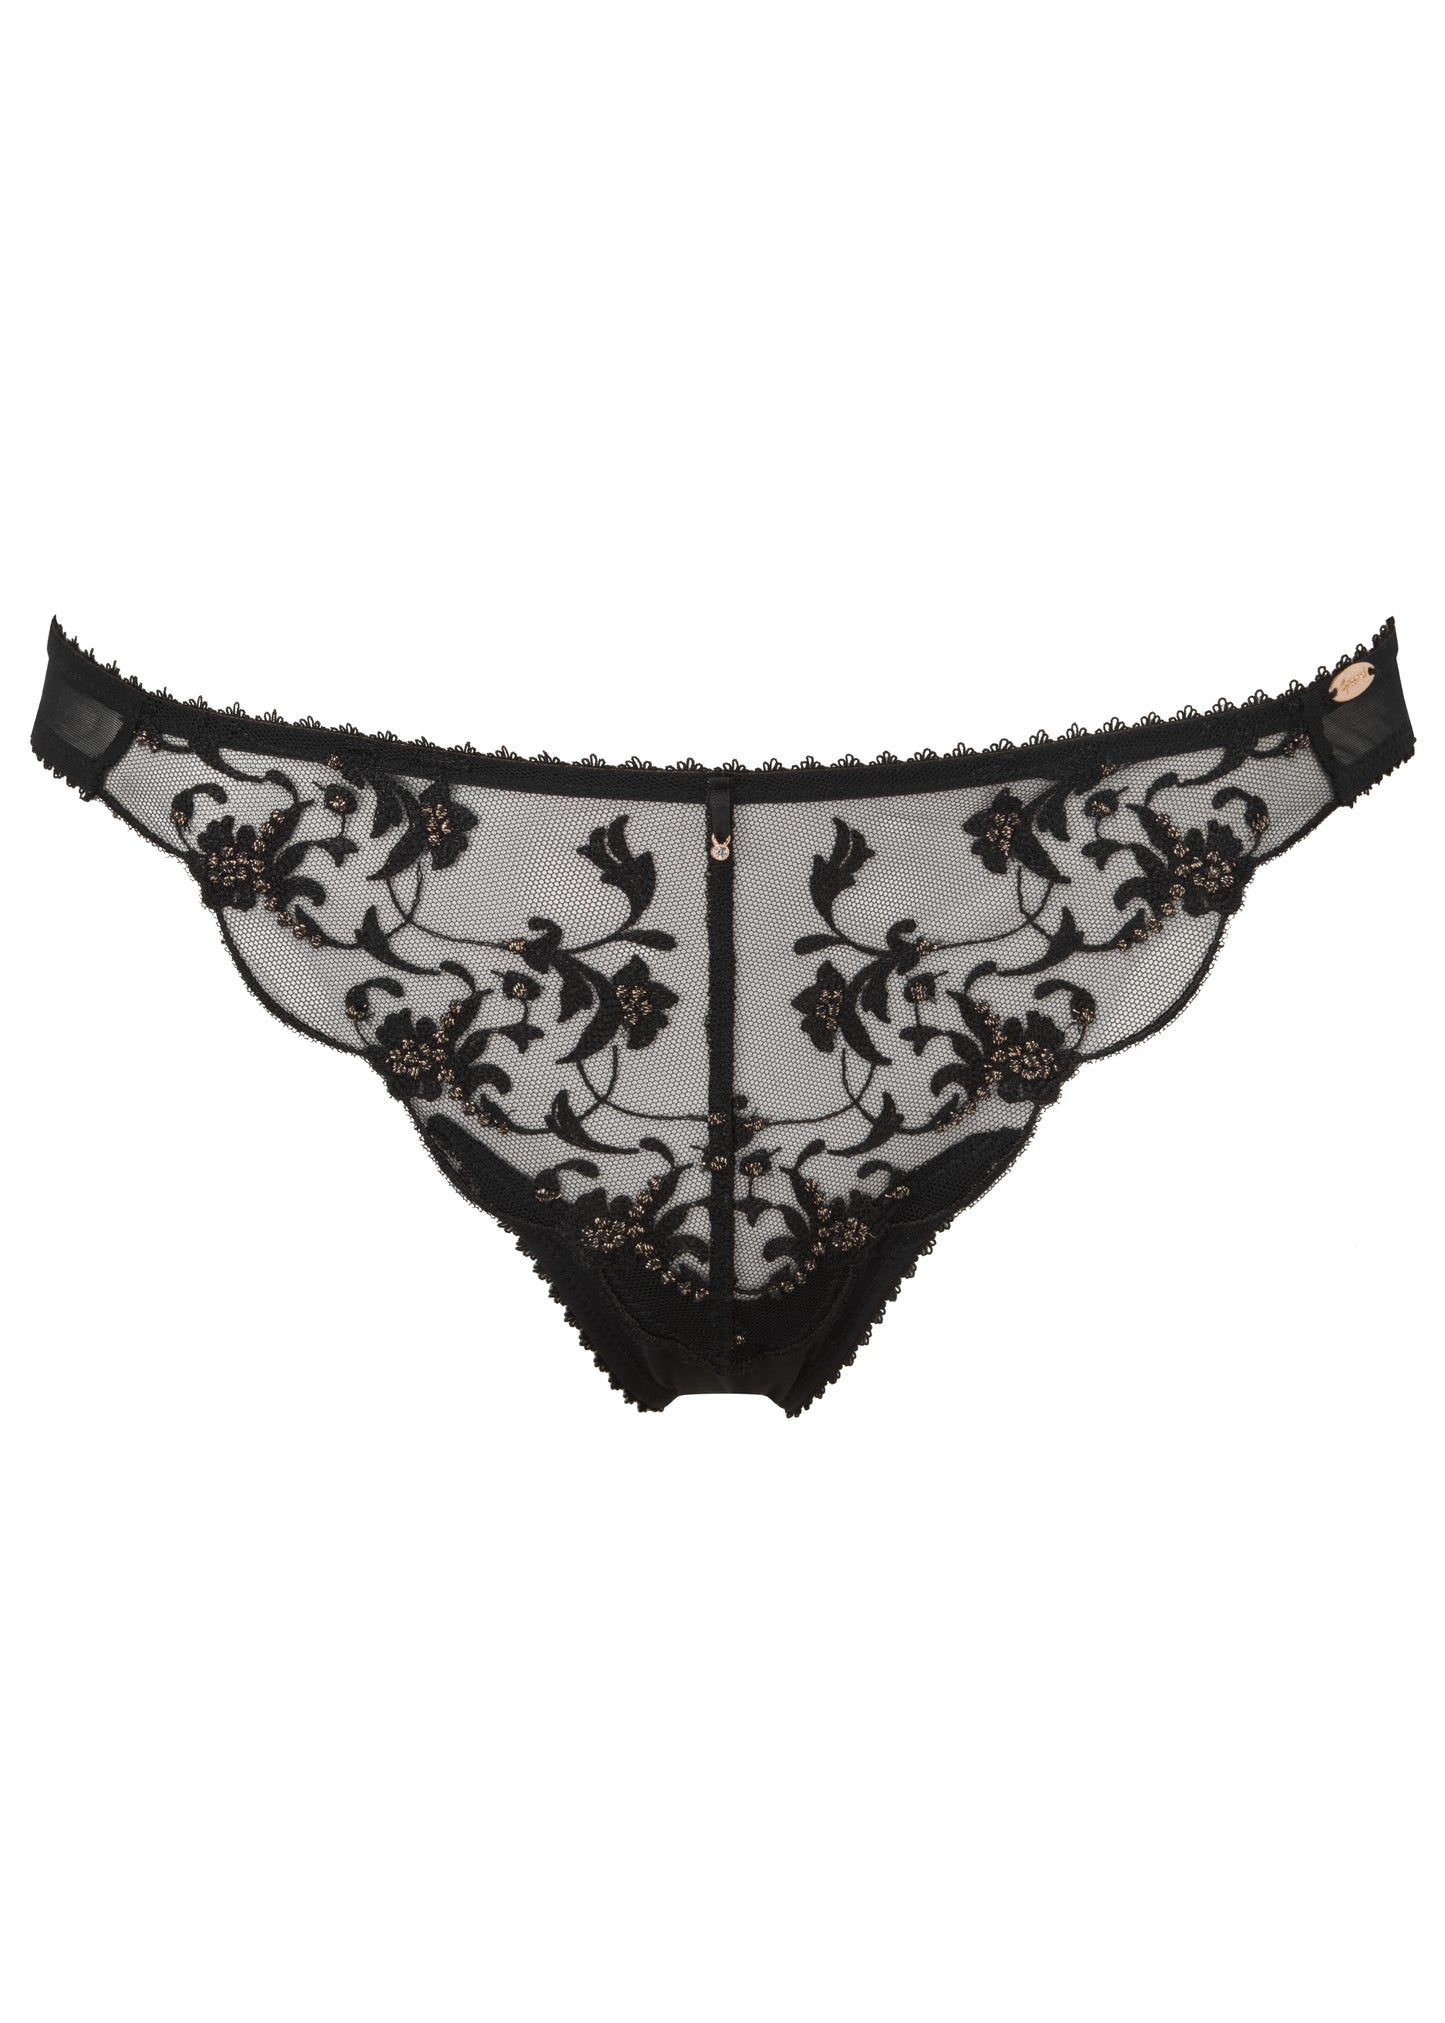 VIP Taboo Thong - Black with Gold